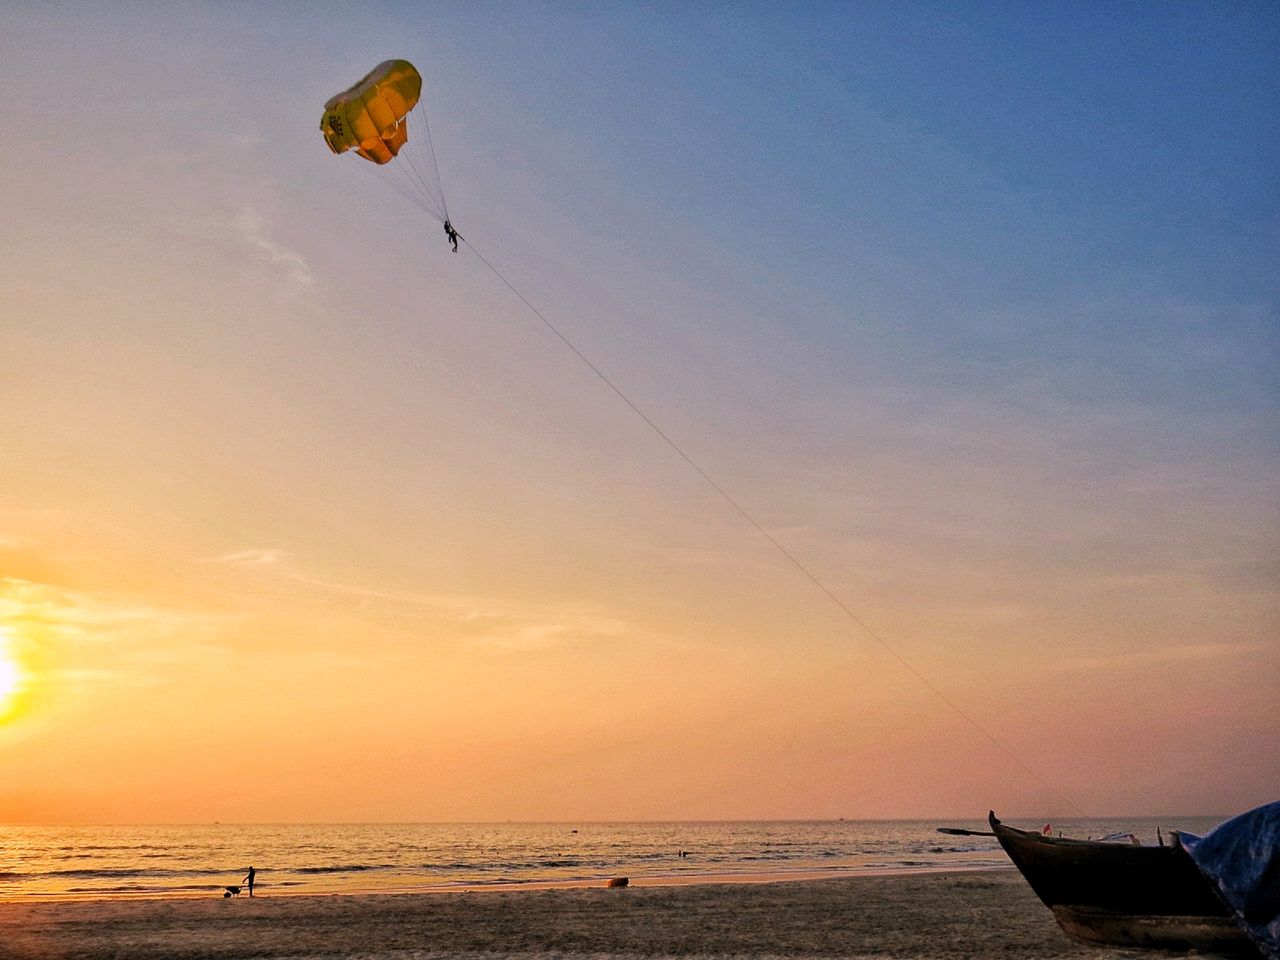 PEOPLE PARAGLIDING AT BEACH DURING SUNSET